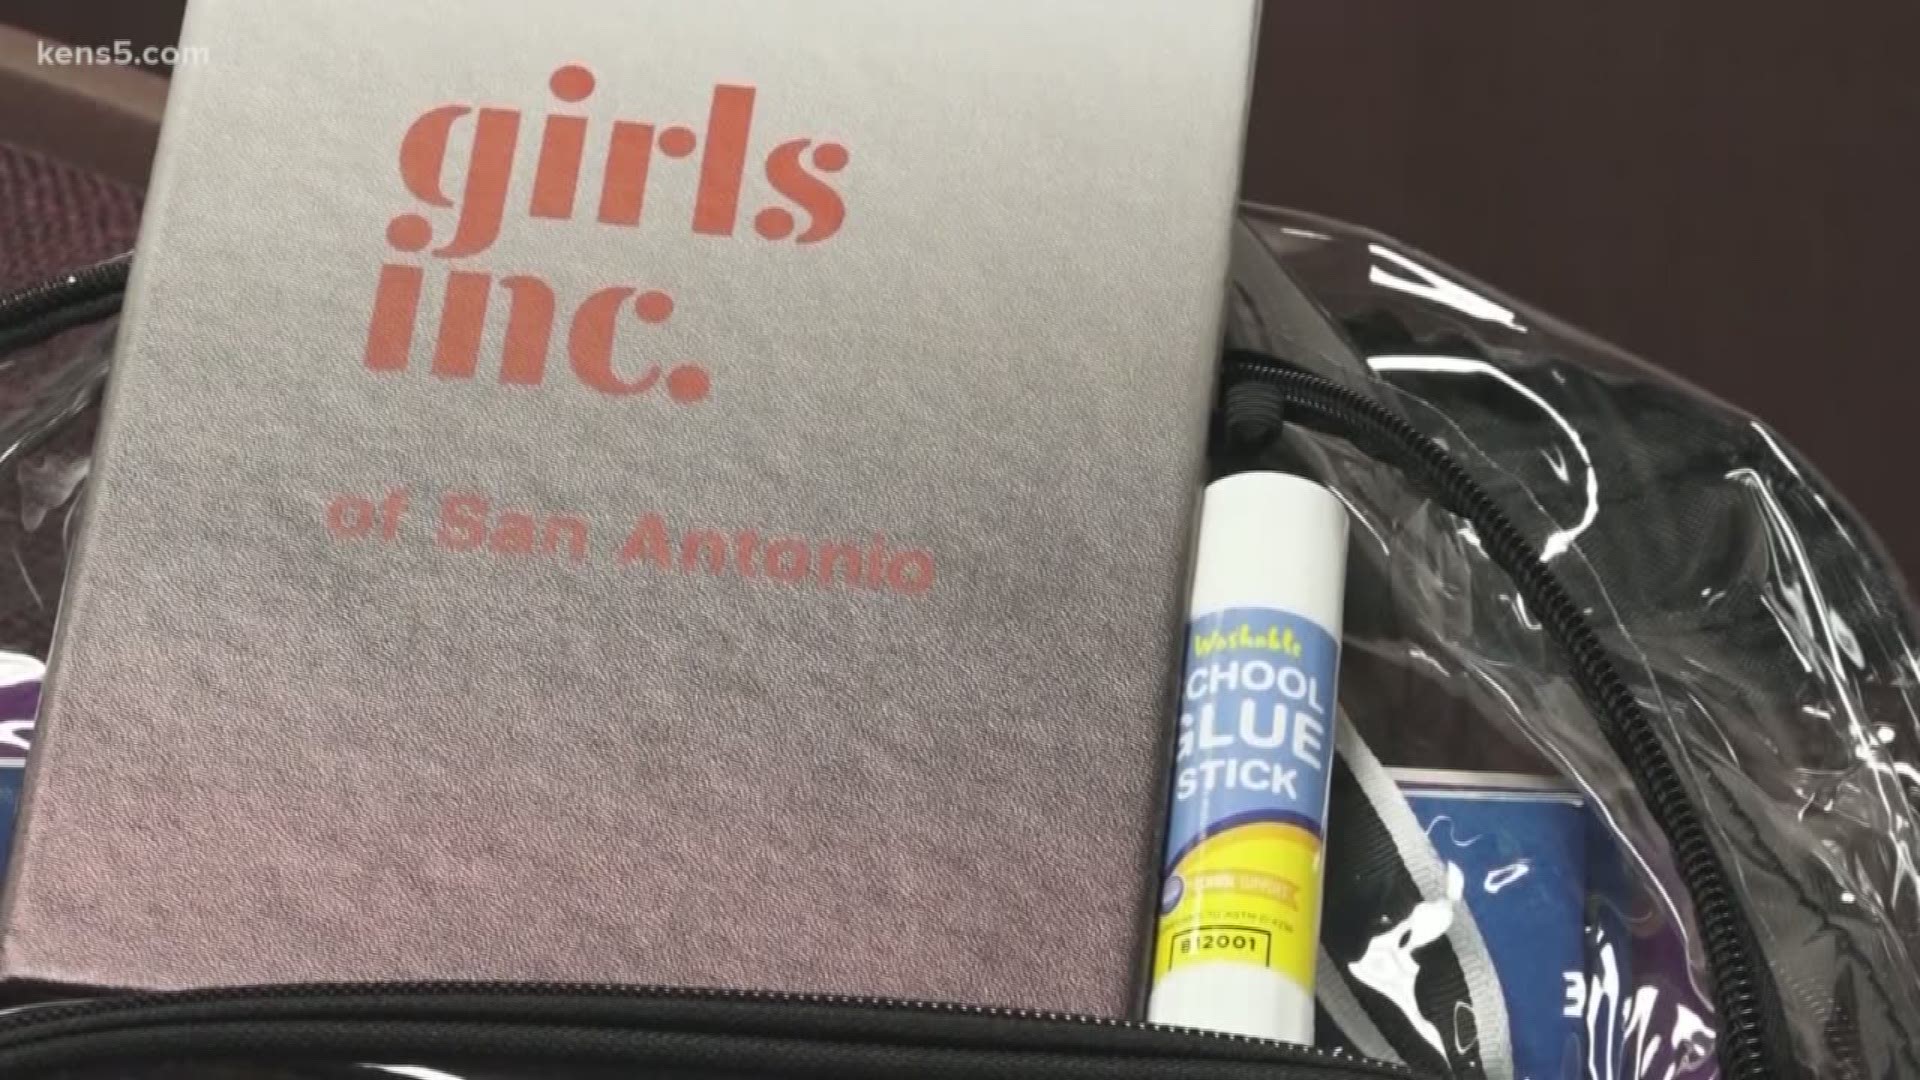 Middle school can be tough, and a nonprofit wants to make sure all San Antonio girls are ready and excited for the year ahead.